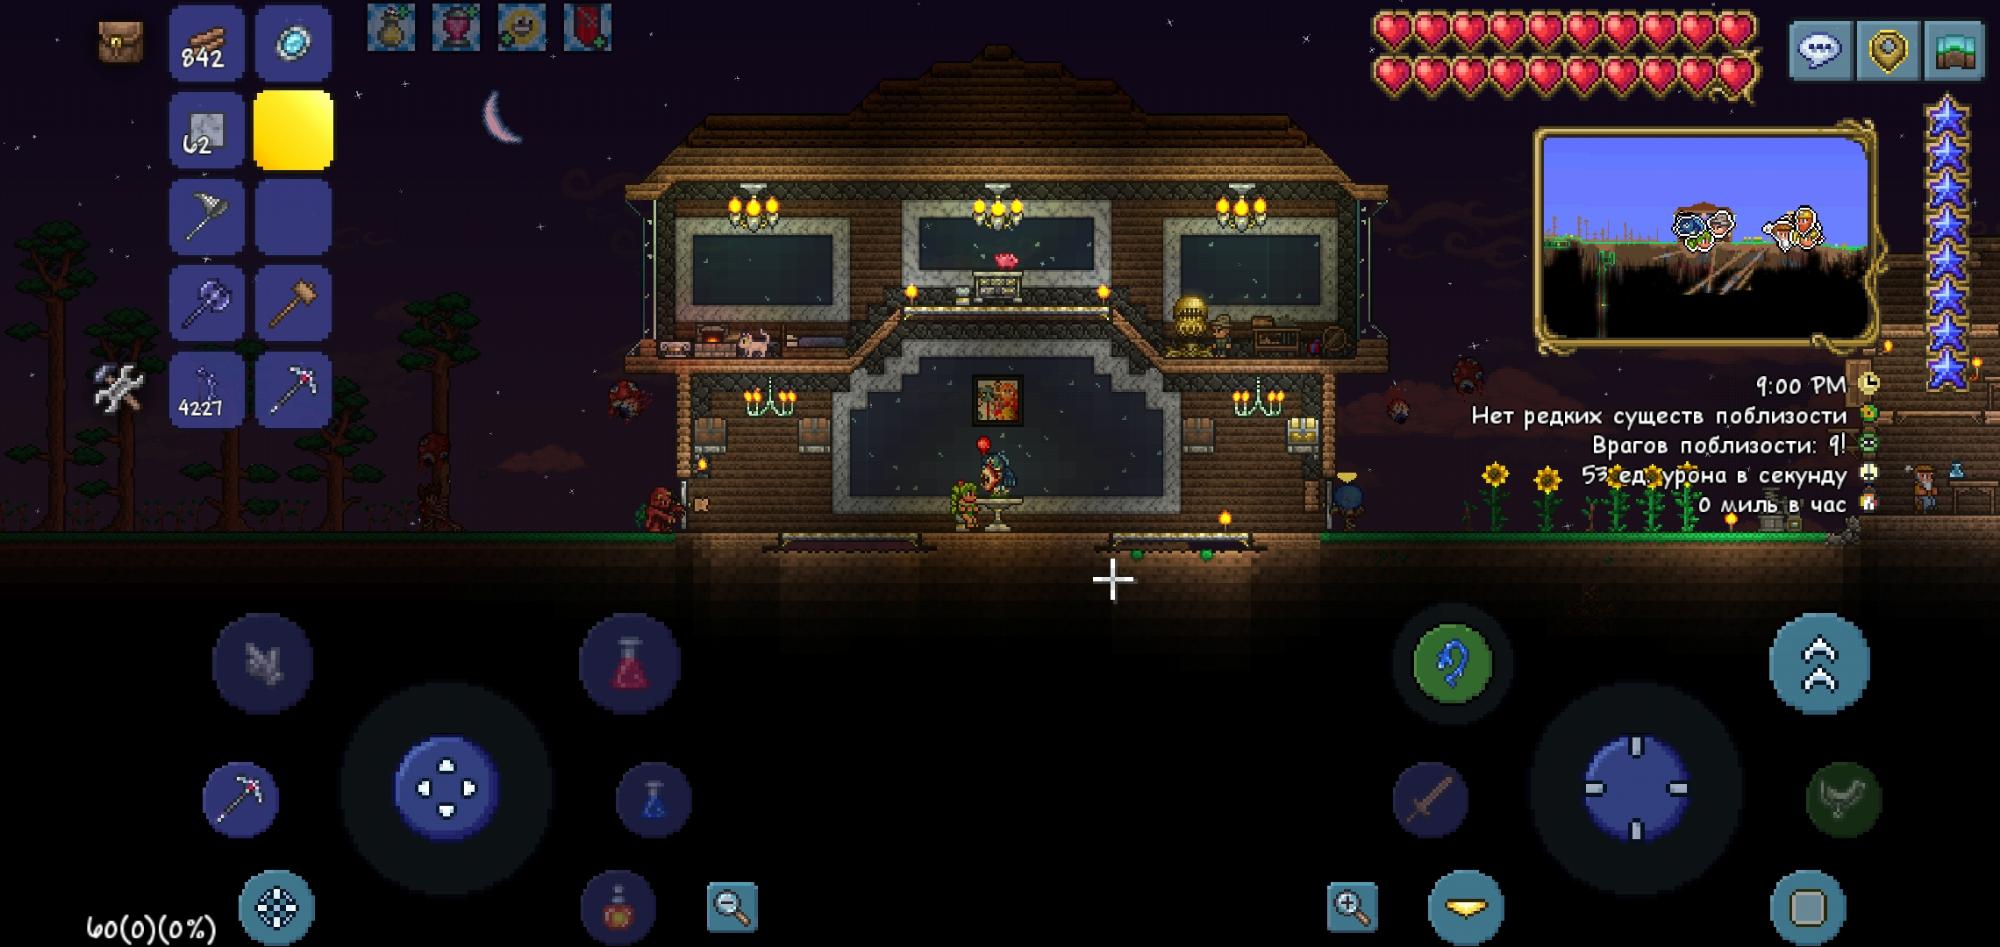 Mod of redemption terraria